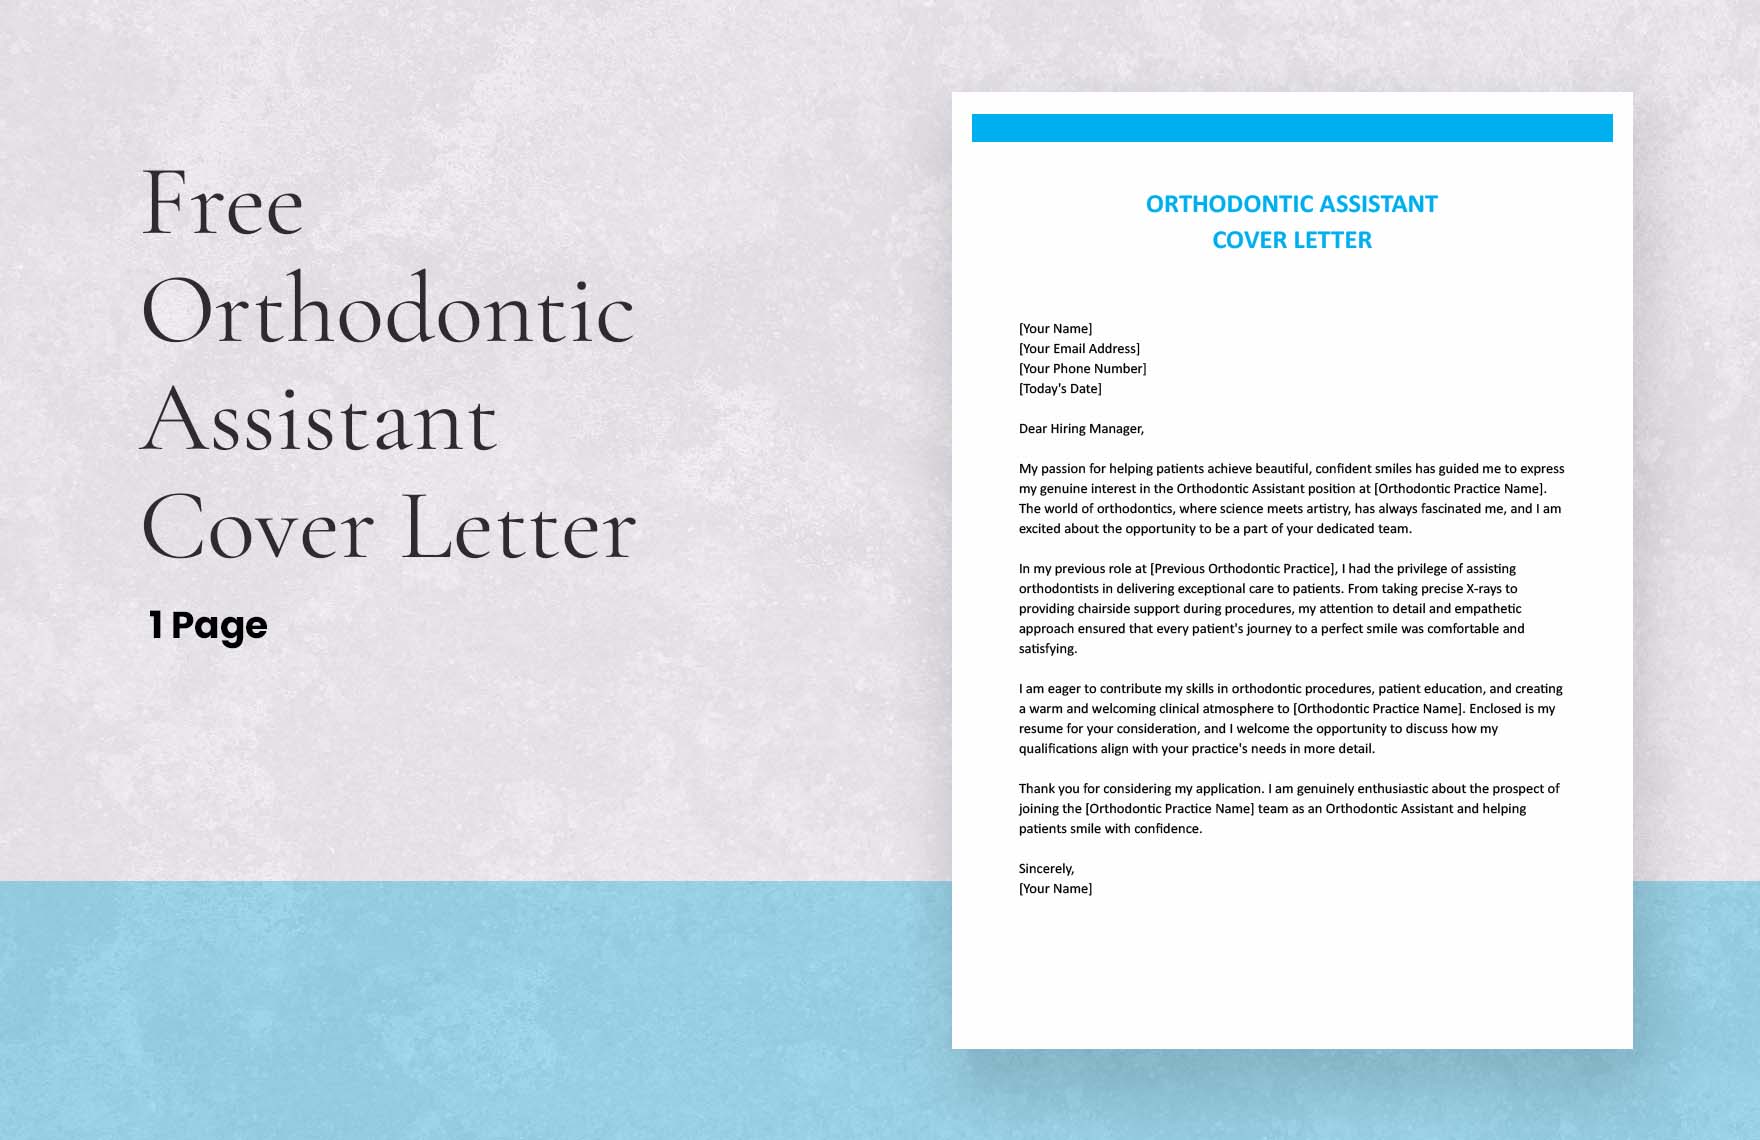 Orthodontic Assistant Cover Letter